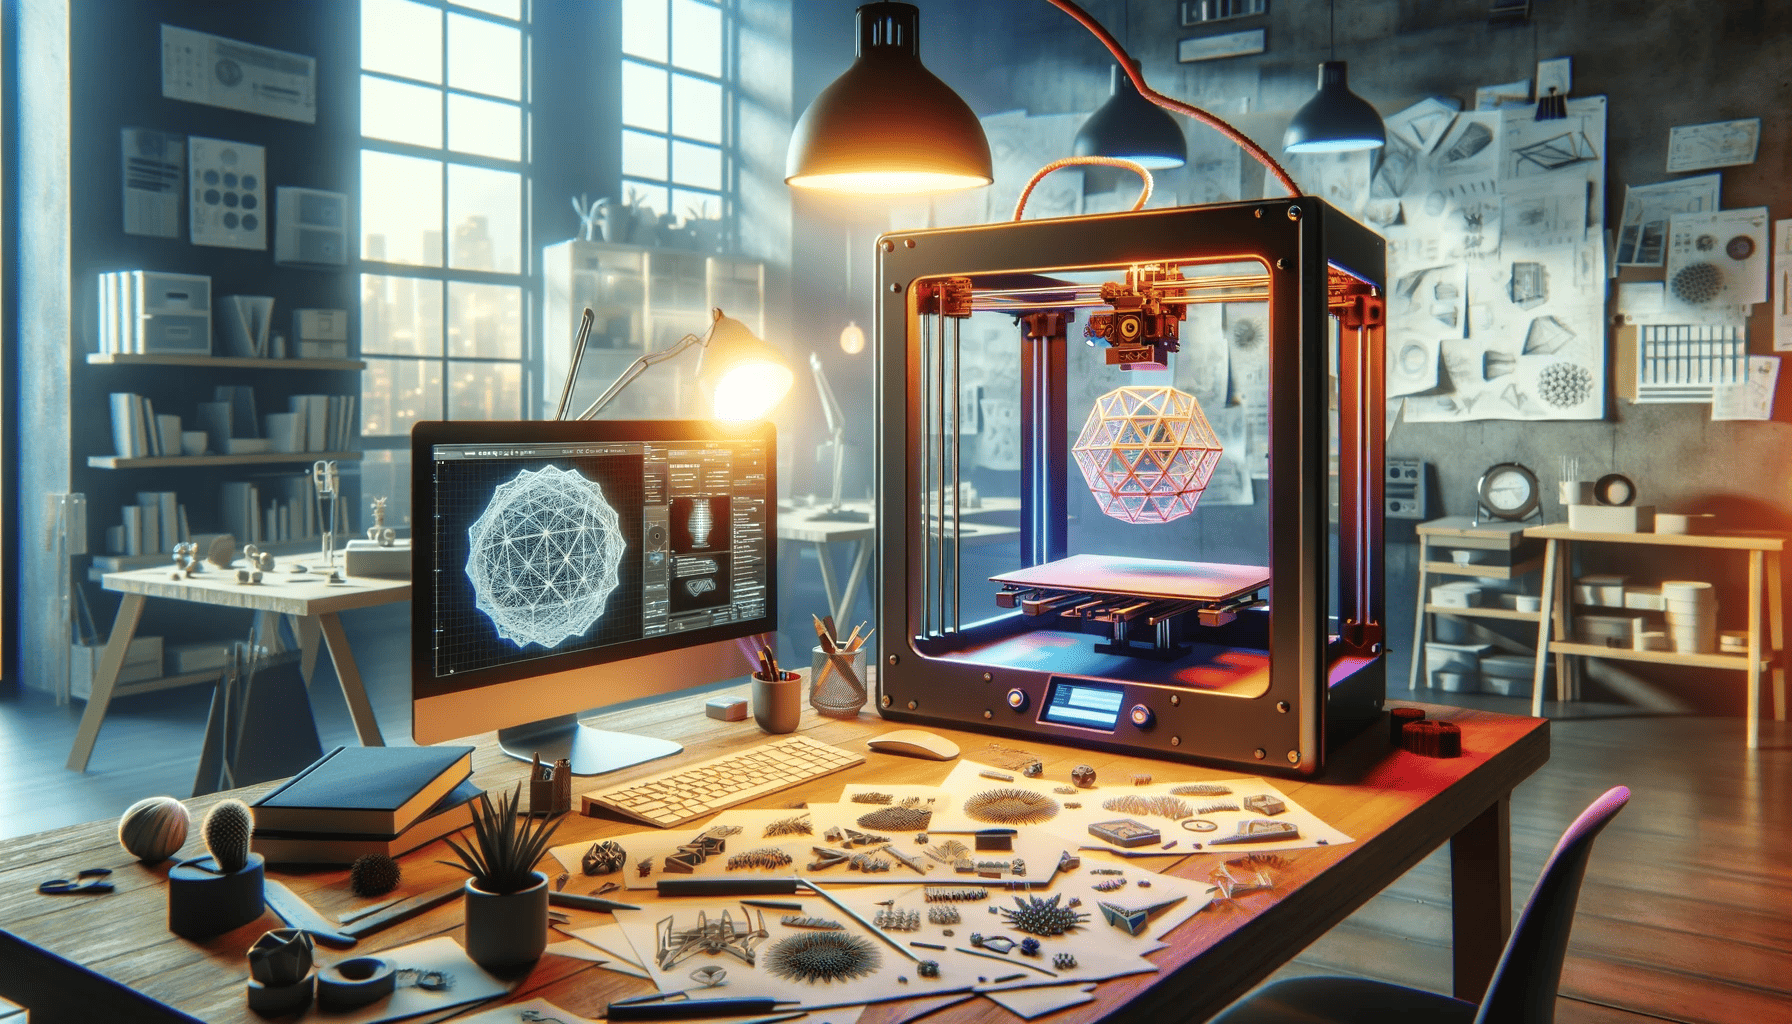 Bring Your Ideas to Life with Custom 3D Printing